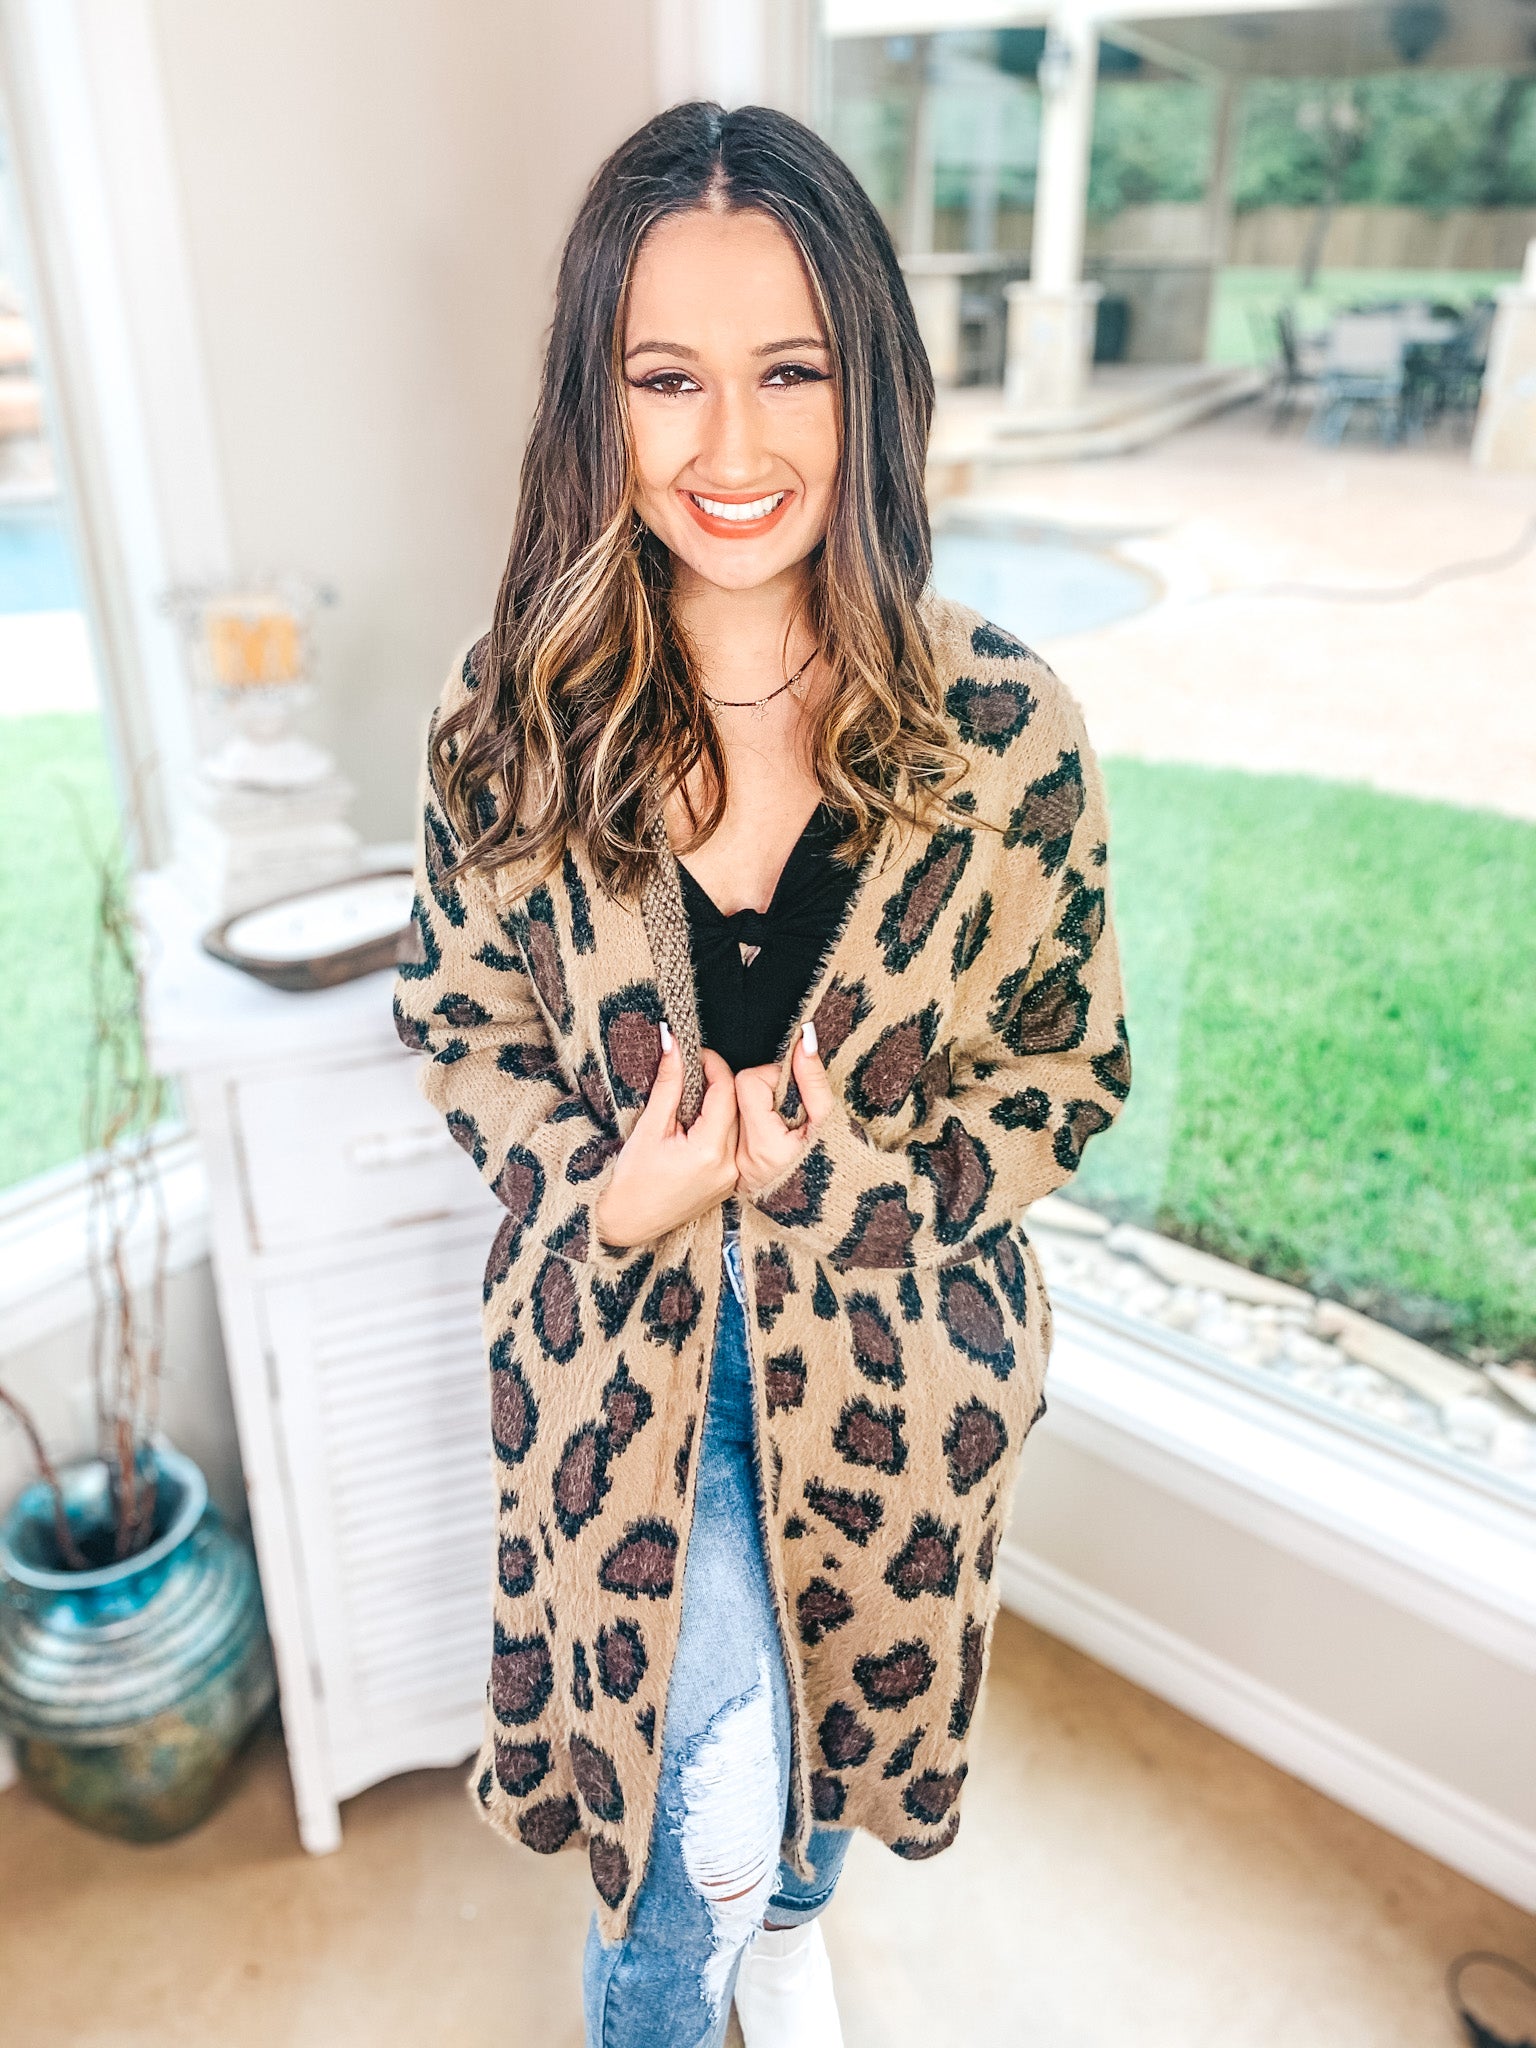 Cozy Chic Leopard Eyelash Cardigan in Camel - Giddy Up Glamour Boutique